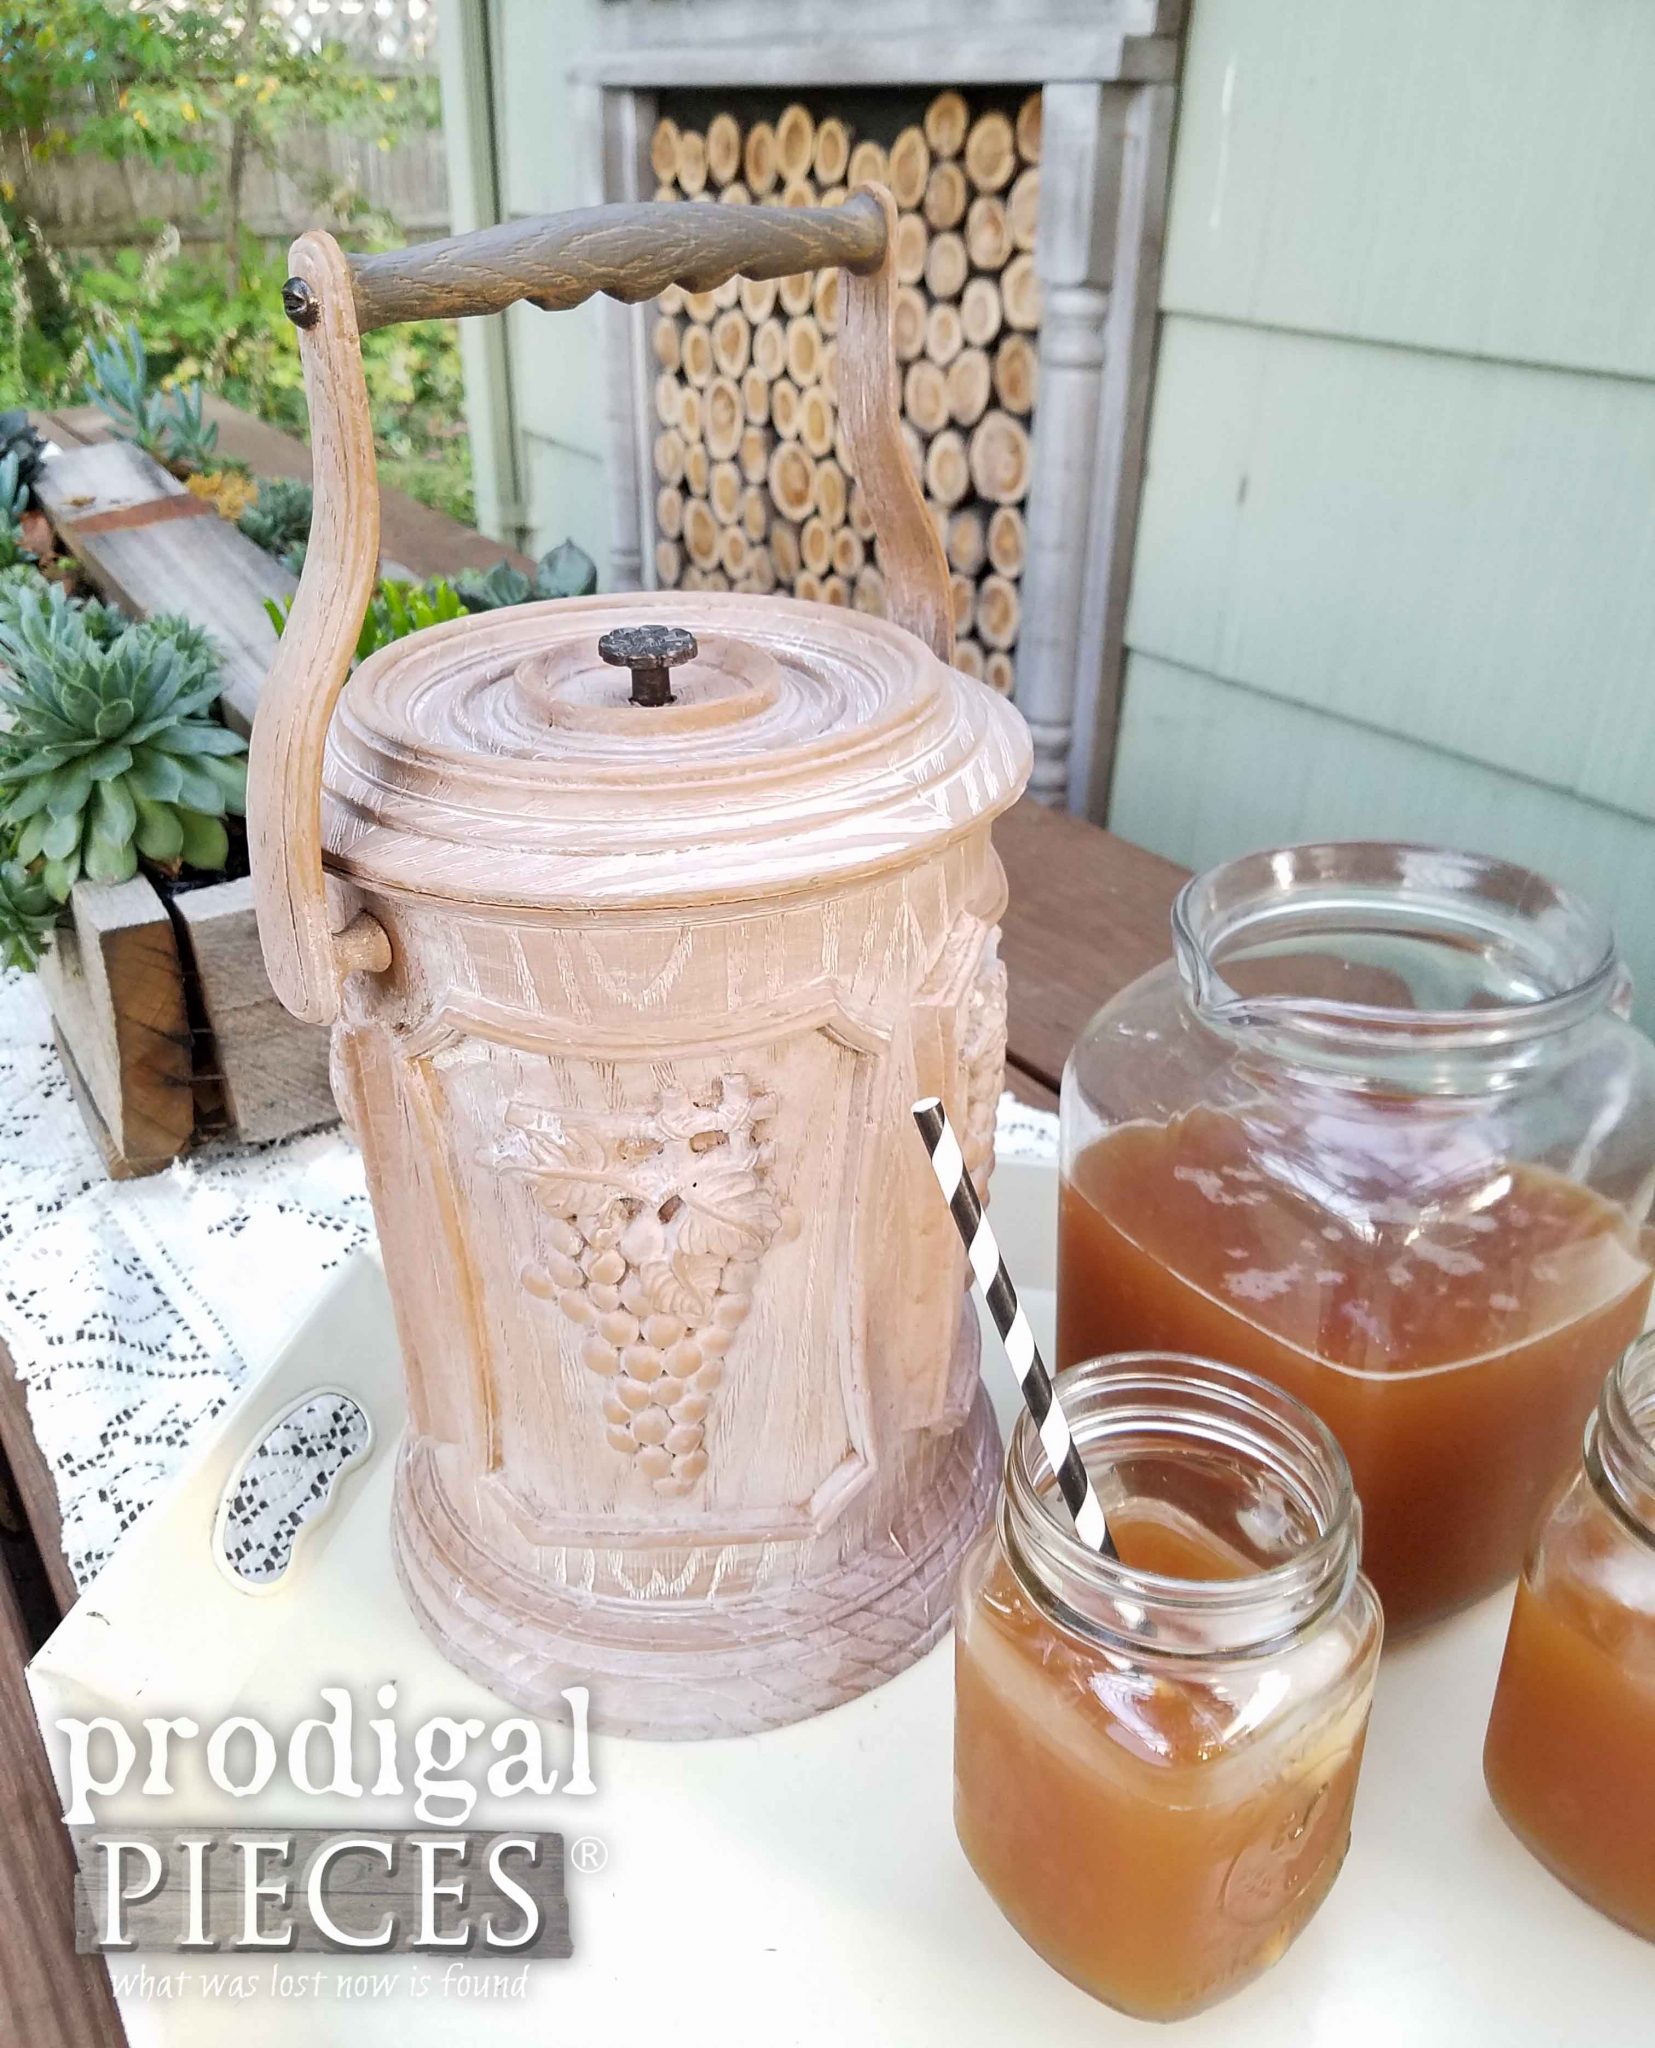 Retro Ice Bucket Gets Farmhouse Style Makeover by Prodigal Pieces | prodigalpieces.com